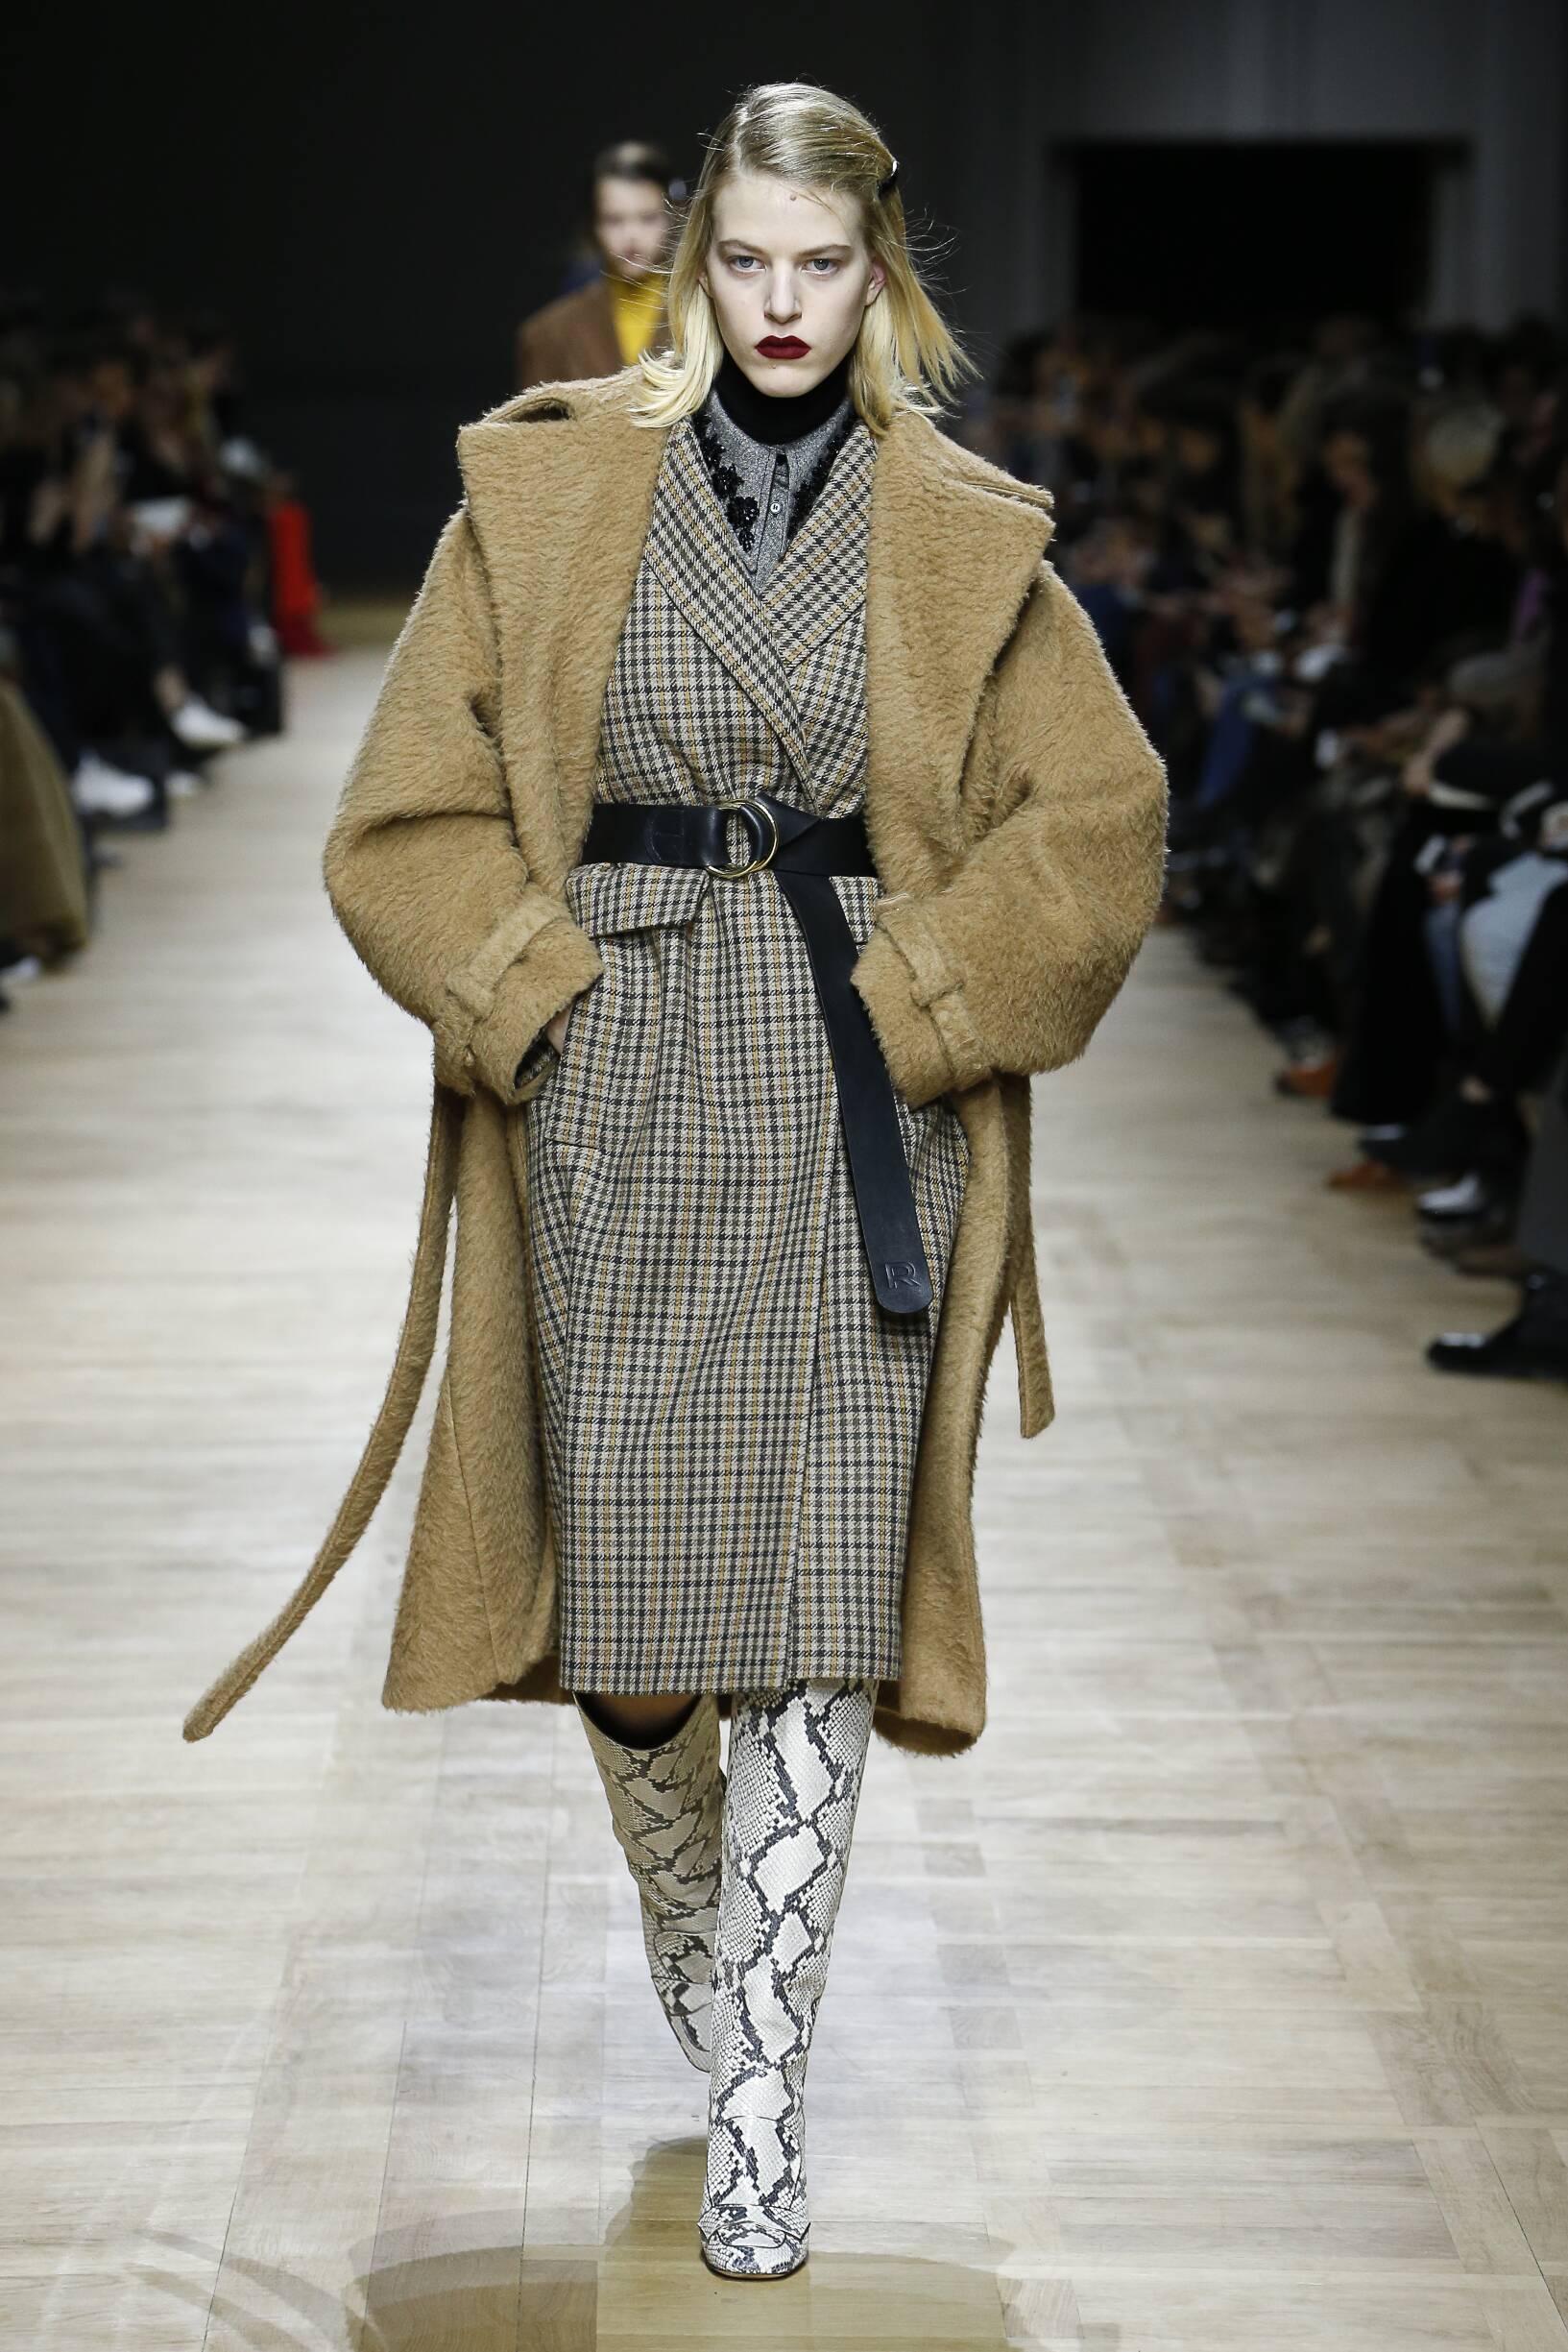 ROCHAS FALL WINTER 2018 WOMEN'S COLLECTION | The Skinny Beep